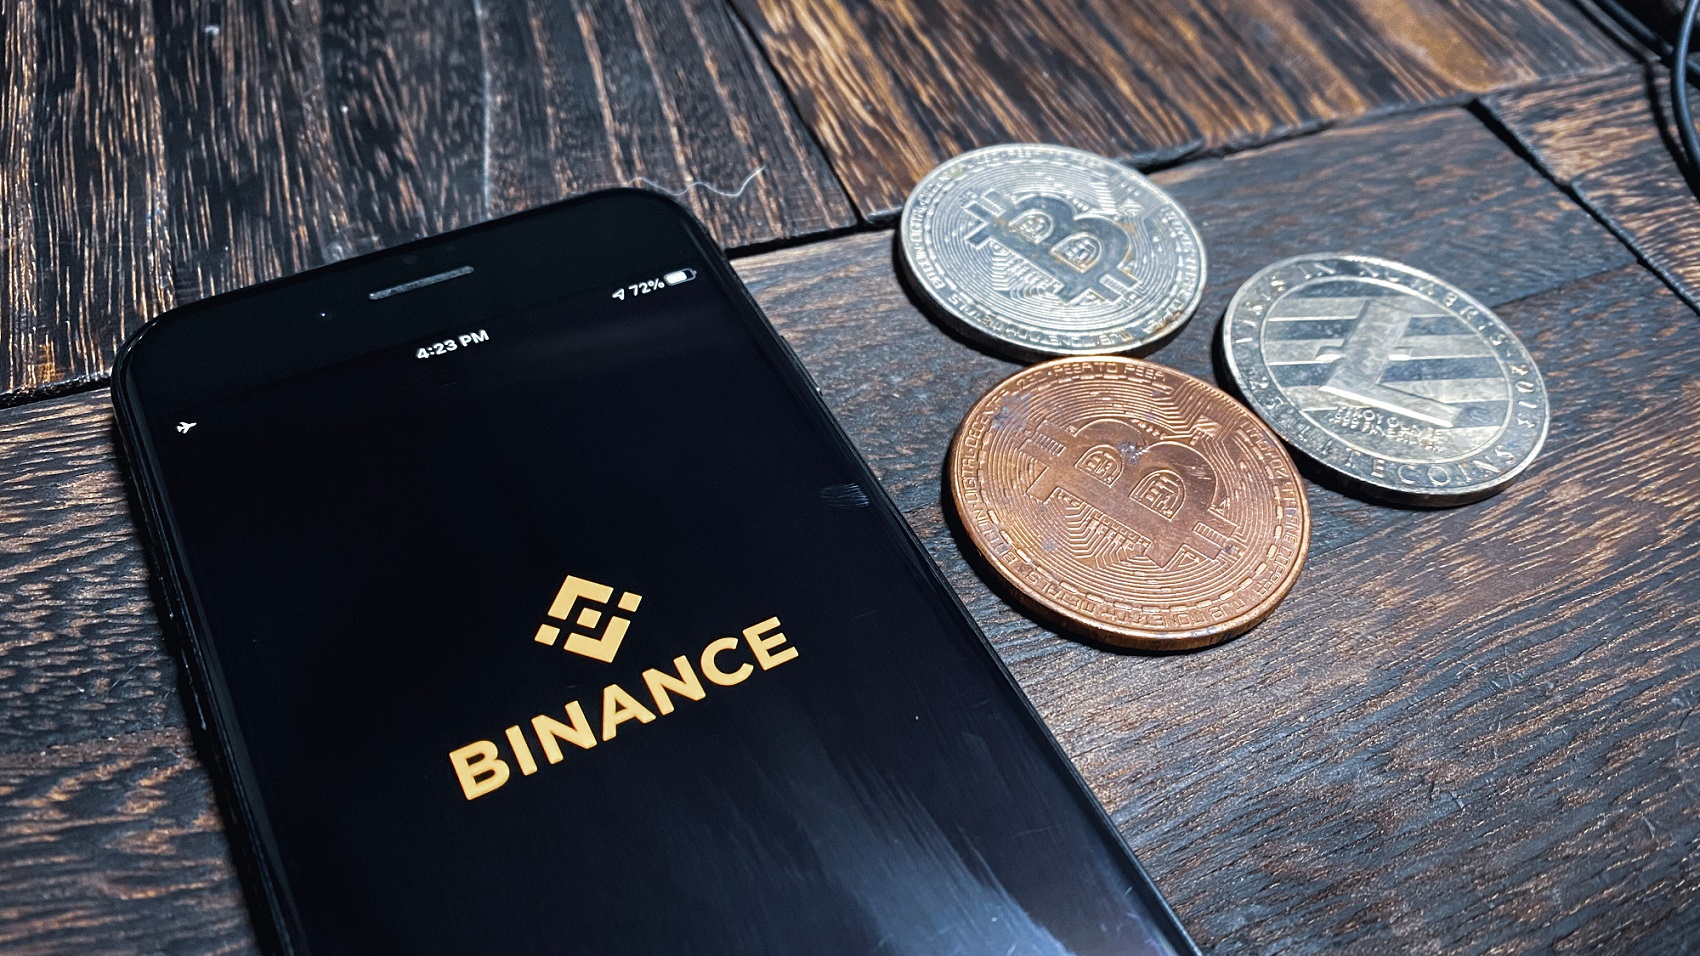 The Binance logo on the screen of a smartphone with tokens symbolizing popular cryptoassets beside it on a table.